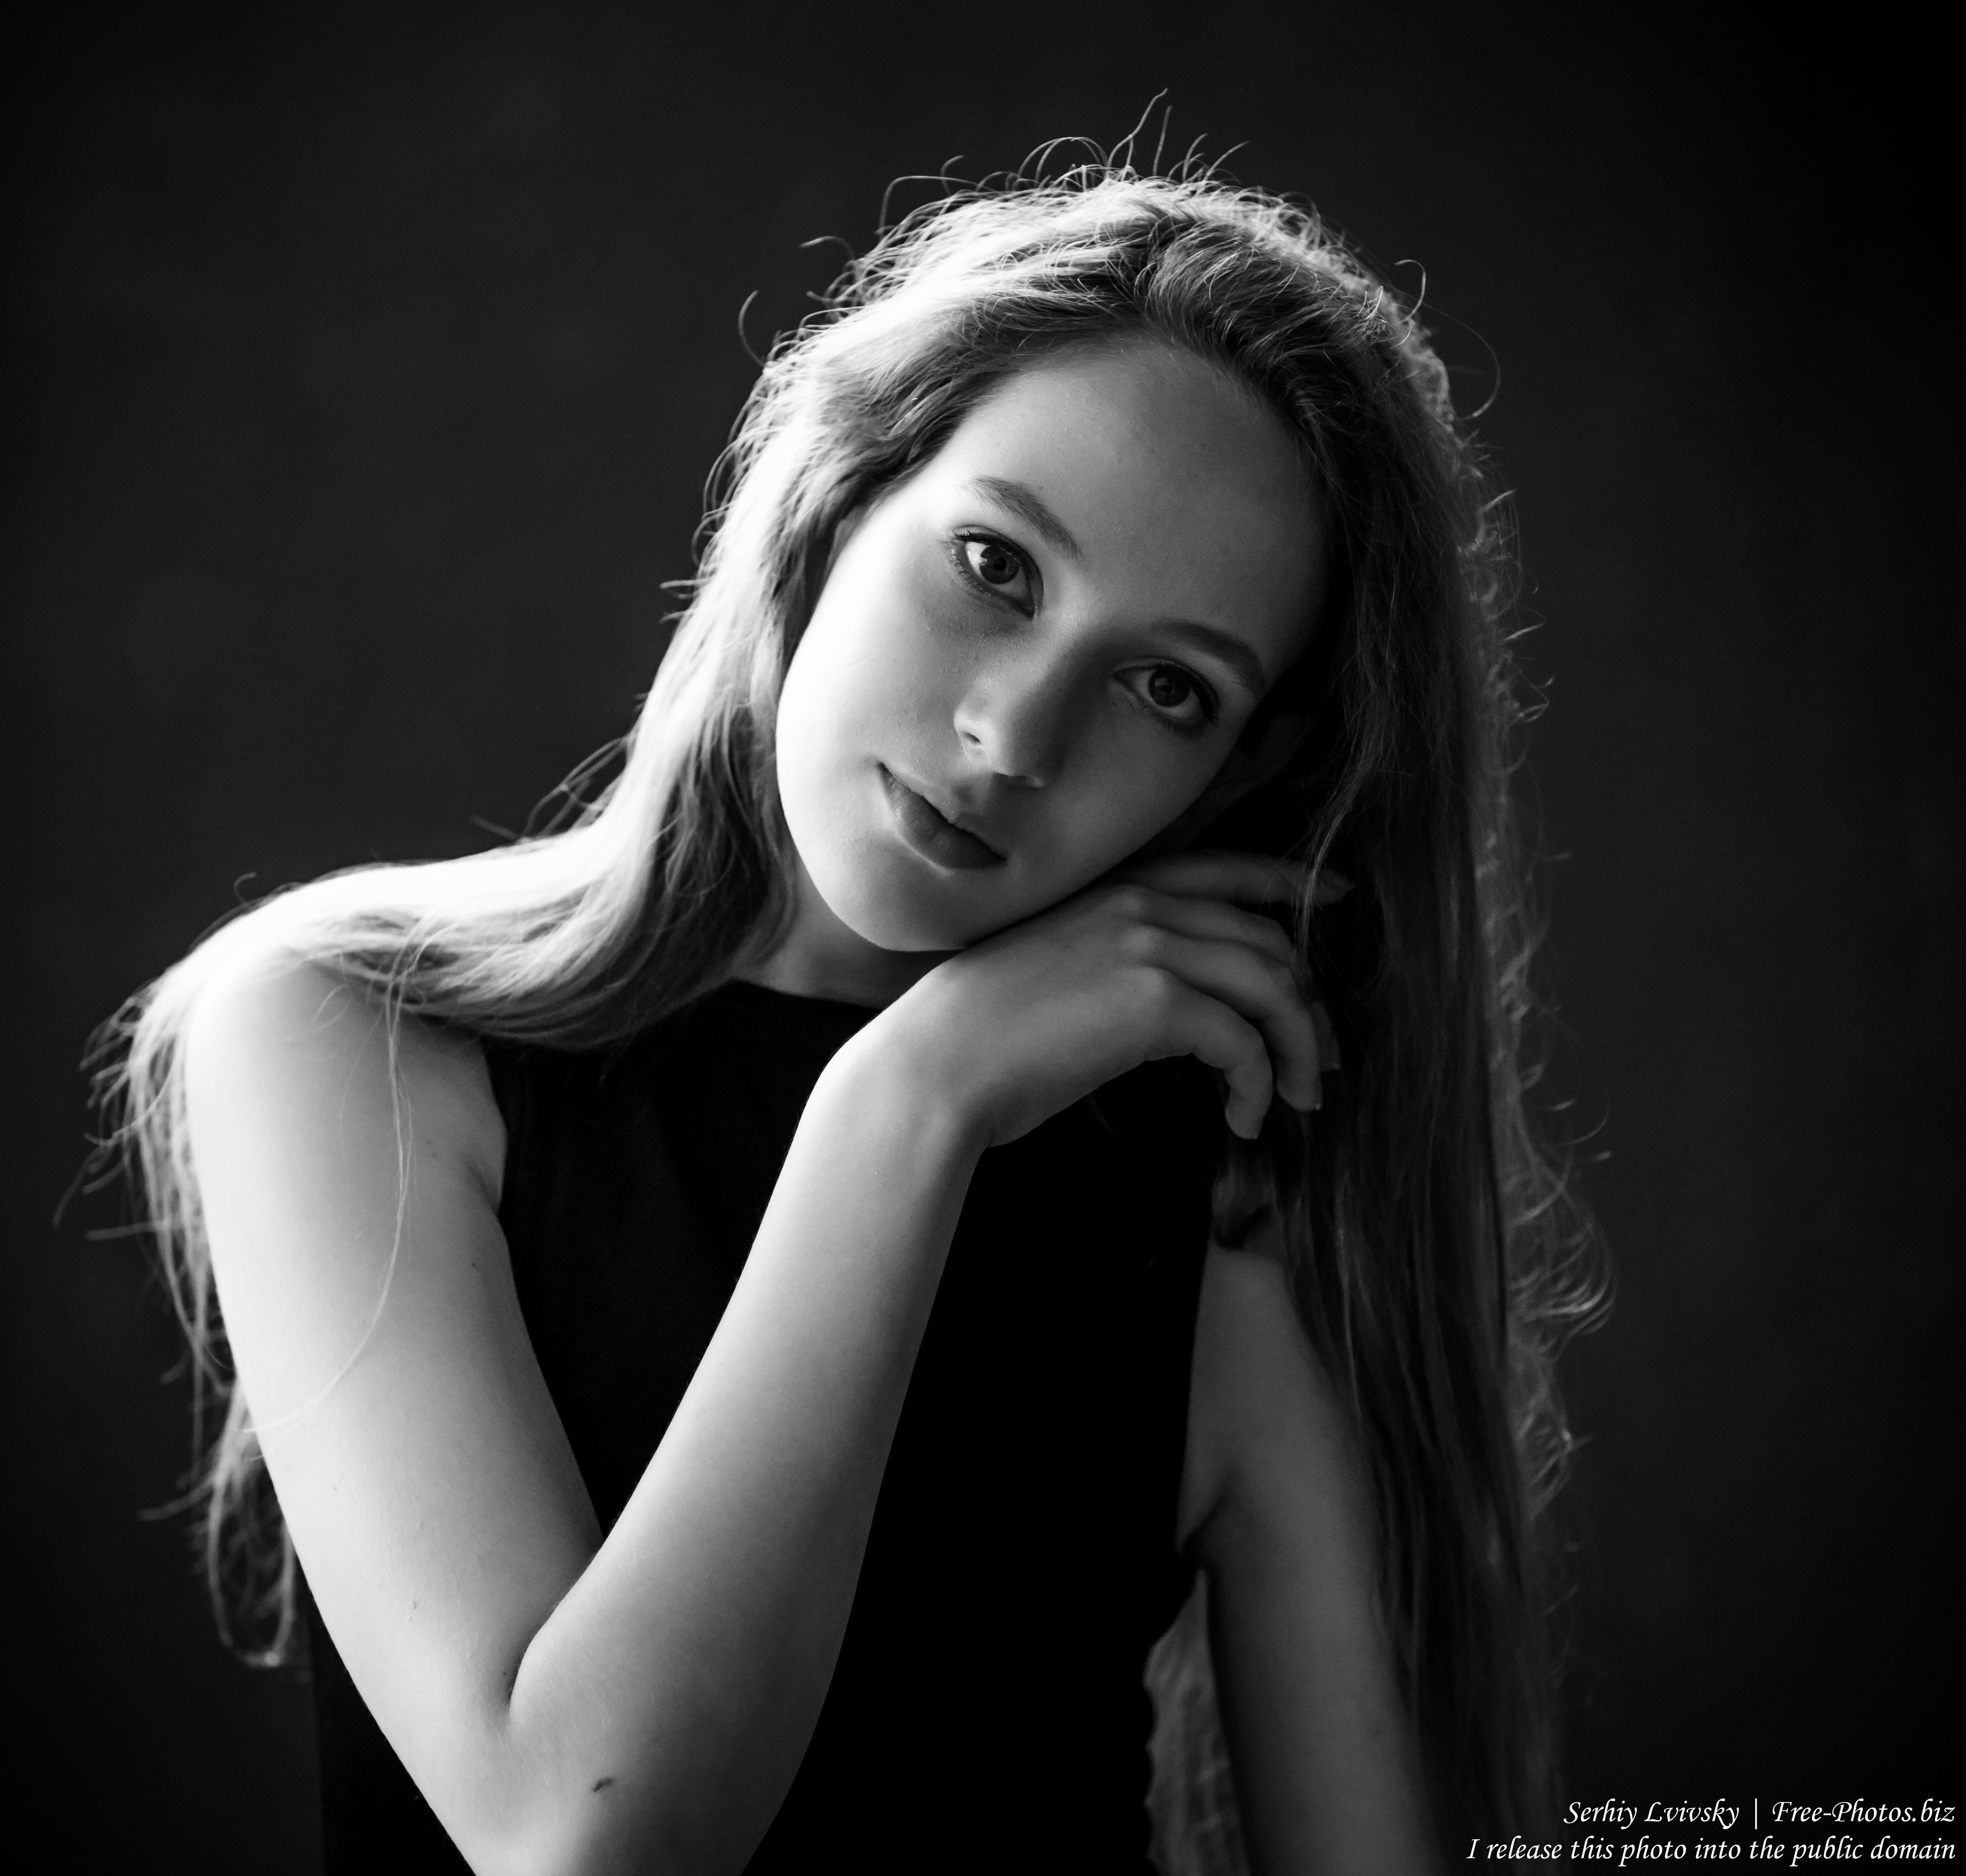 Nastia - a 16-year-old girl with natural fair hair photographed in June 2019 by Serhiy Lvivsky, picture 30